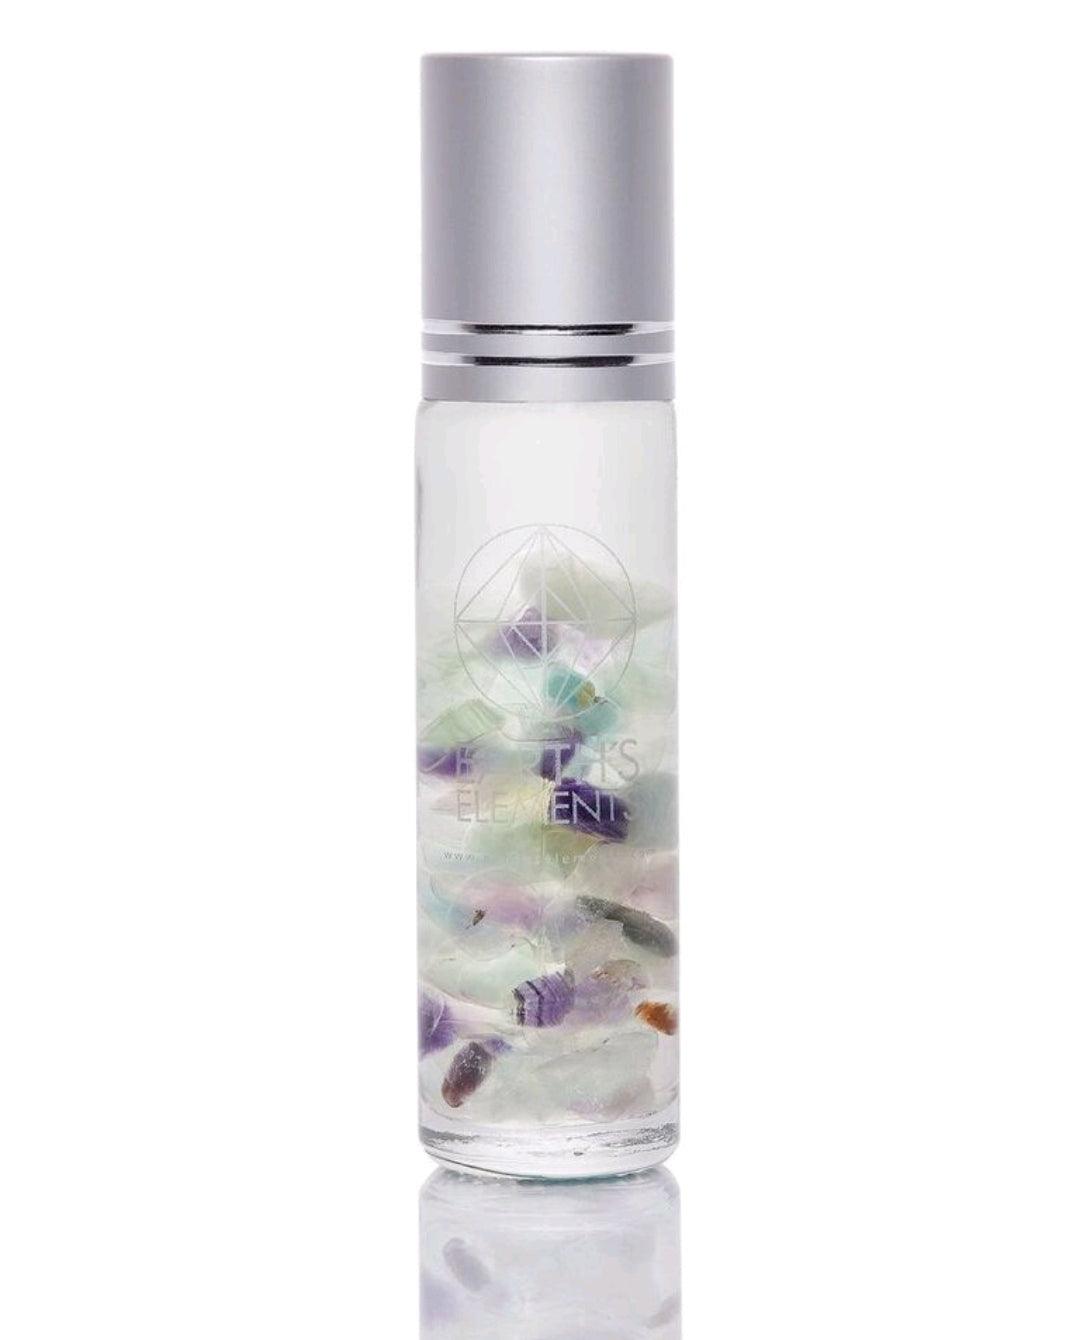 Intuition - Aromatherapy & Crystal Organic Roll On - The Rutile Ltd